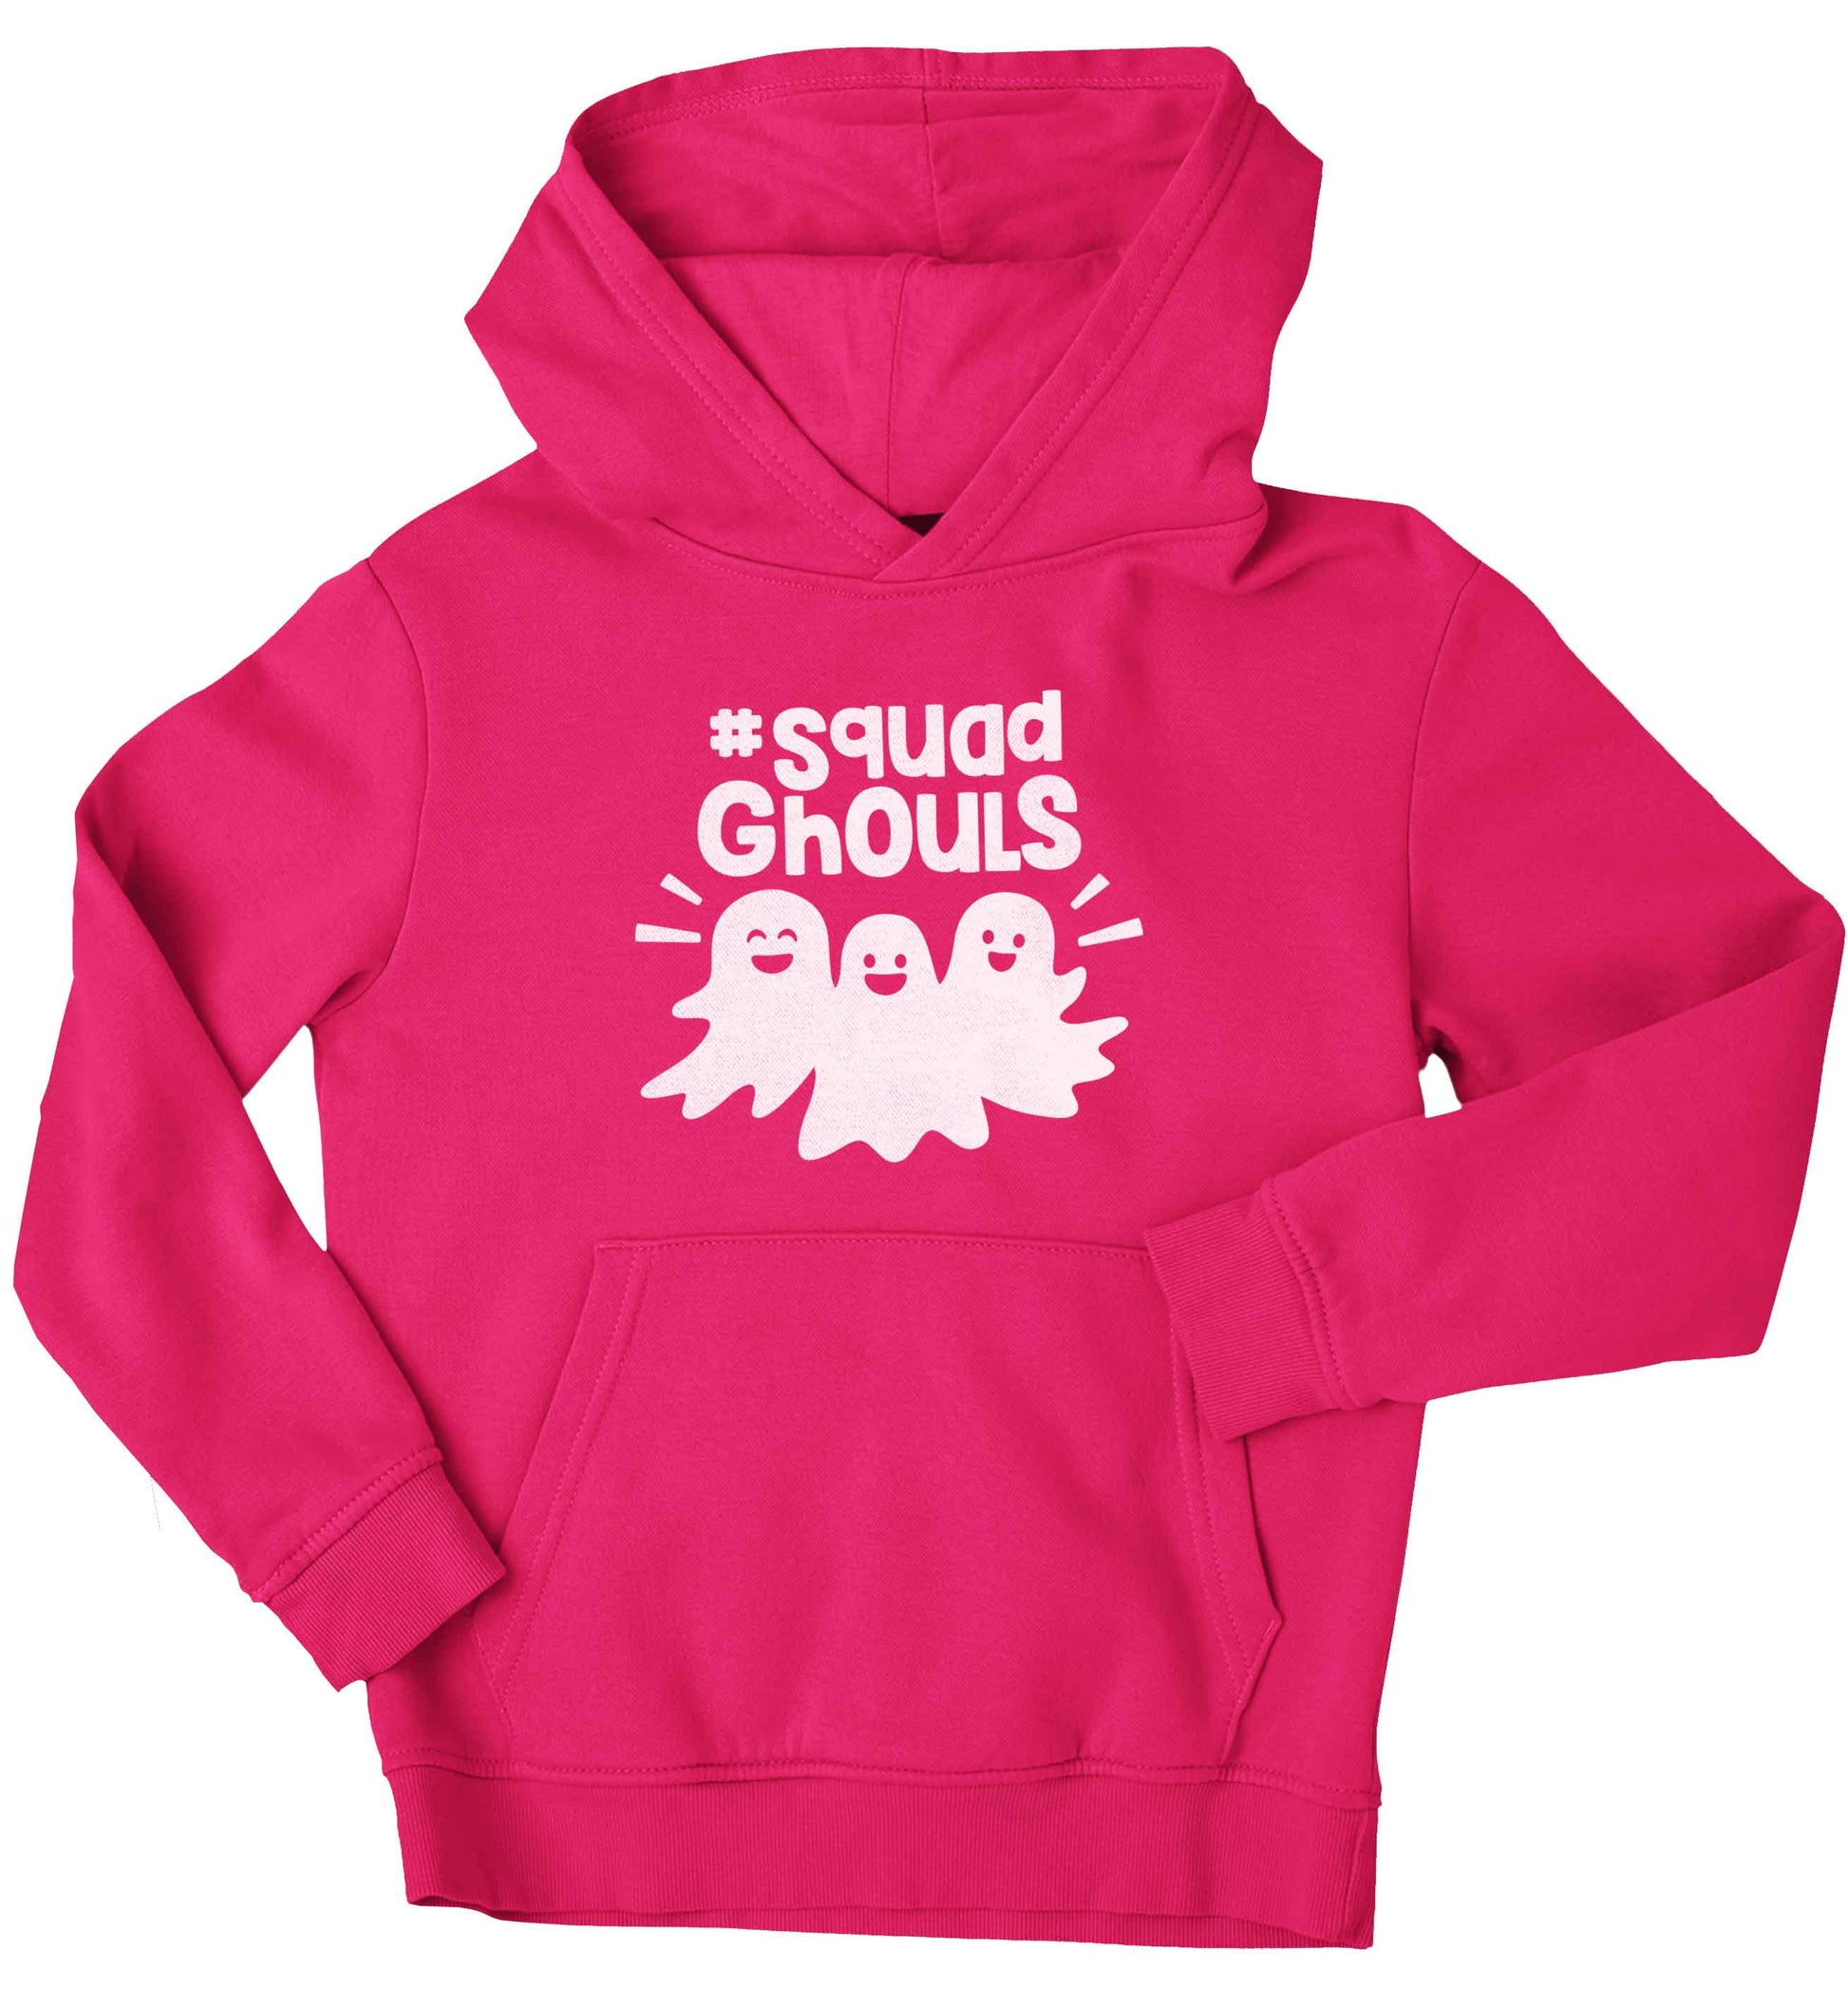 Squad ghouls Kit children's pink hoodie 12-13 Years